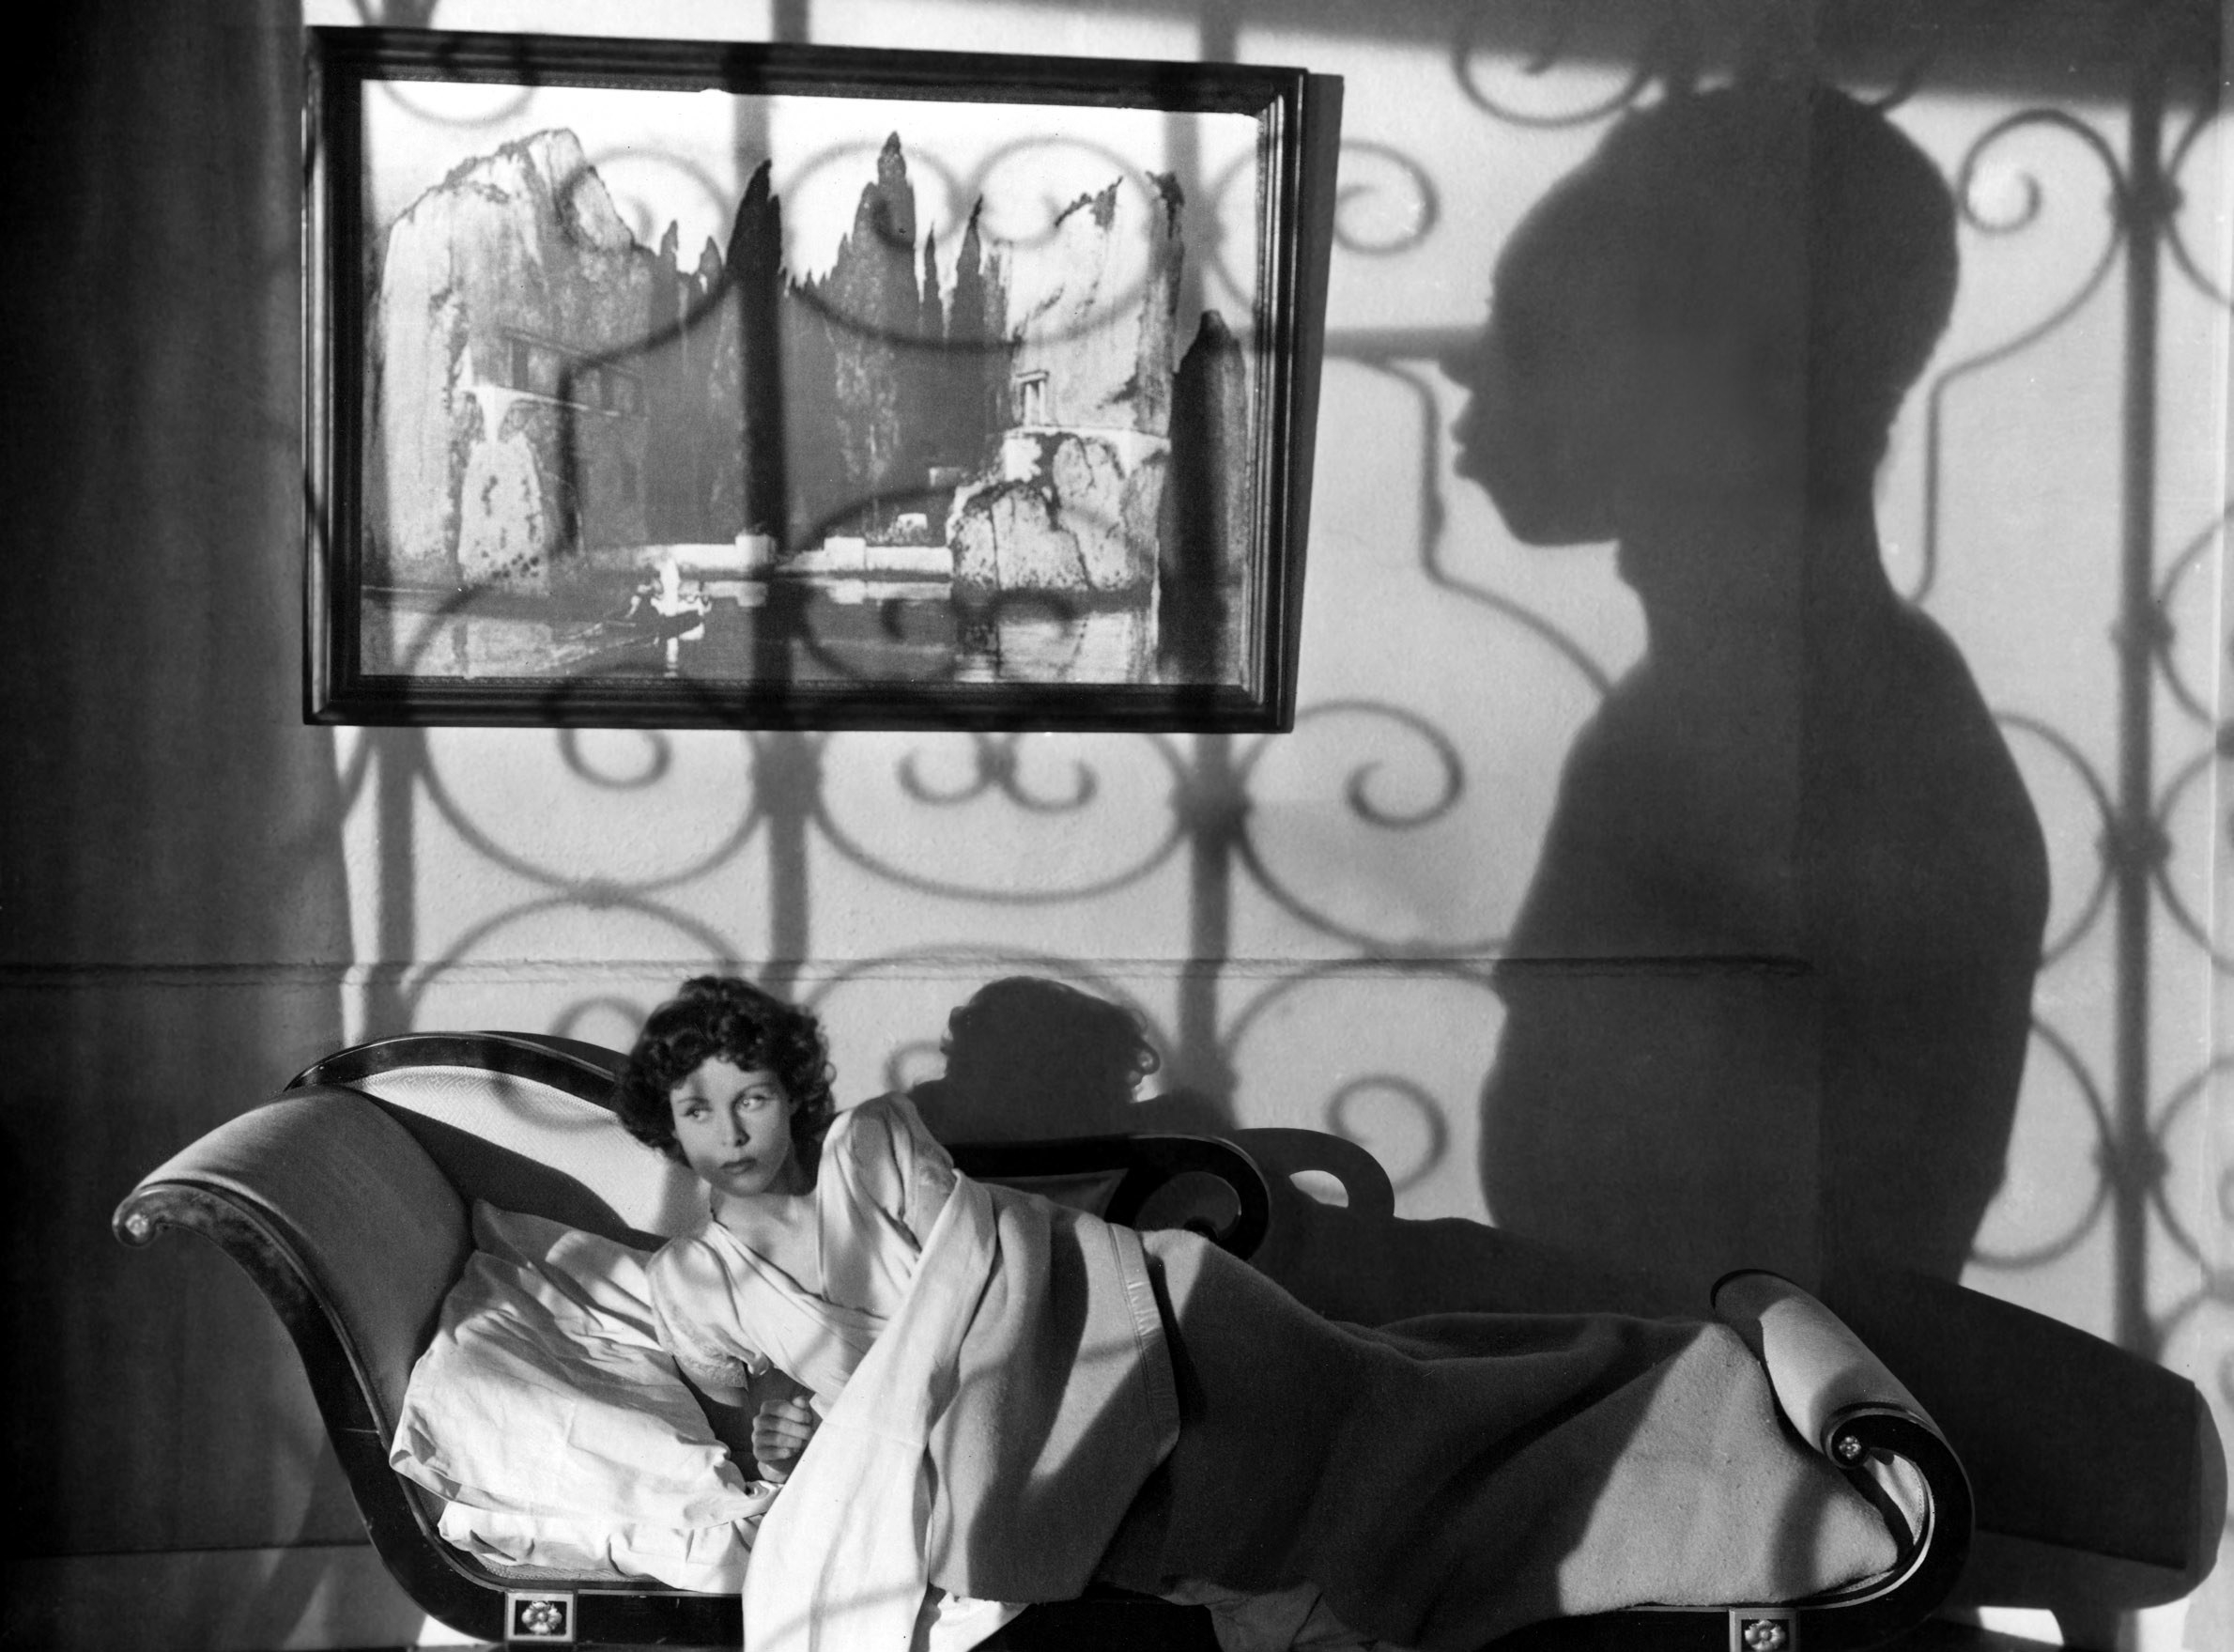 A woman looks out the window as a shadow comes into view